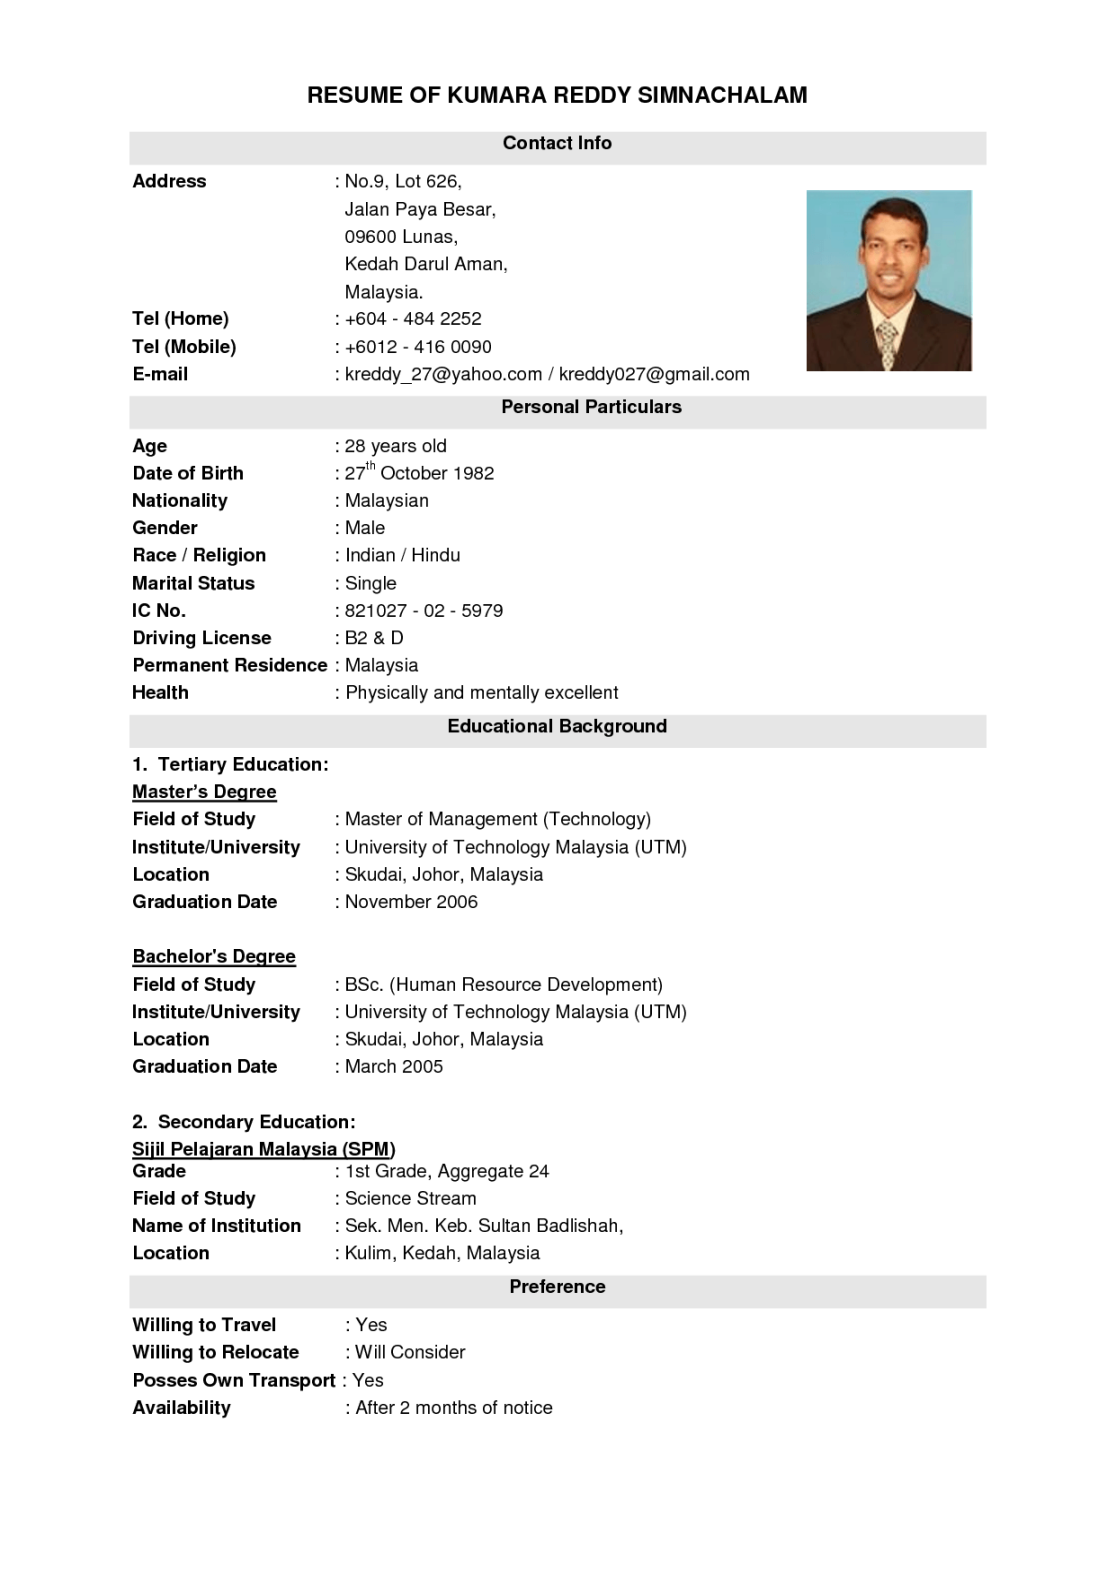 Image result for malaysian resume  Resume format download, Job